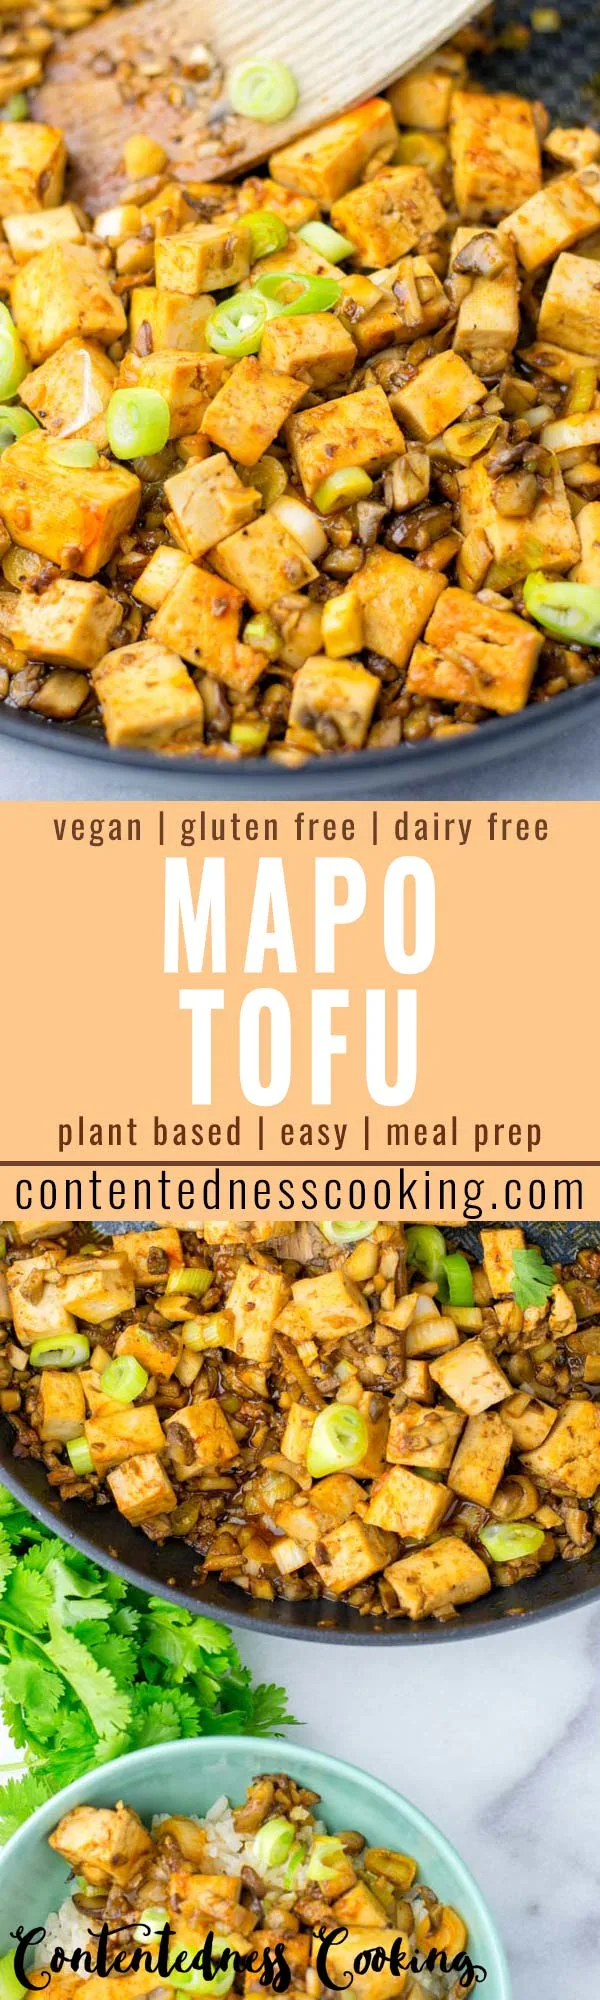 This Mapo Tofu is ready in under 15 minutes, versatile, flavor packed and protein rich. Serve plain or with rice and quinoa the ultimate Chinese comfort food made vegan plus gluten free, yum! #vegan #dairyfree #glutenfree #vegetarian #onepotmeals #contentednesscooking #15minutemeals #dinner #lunch #mealprep #budgetmeals #comfortfood #mapotofu 